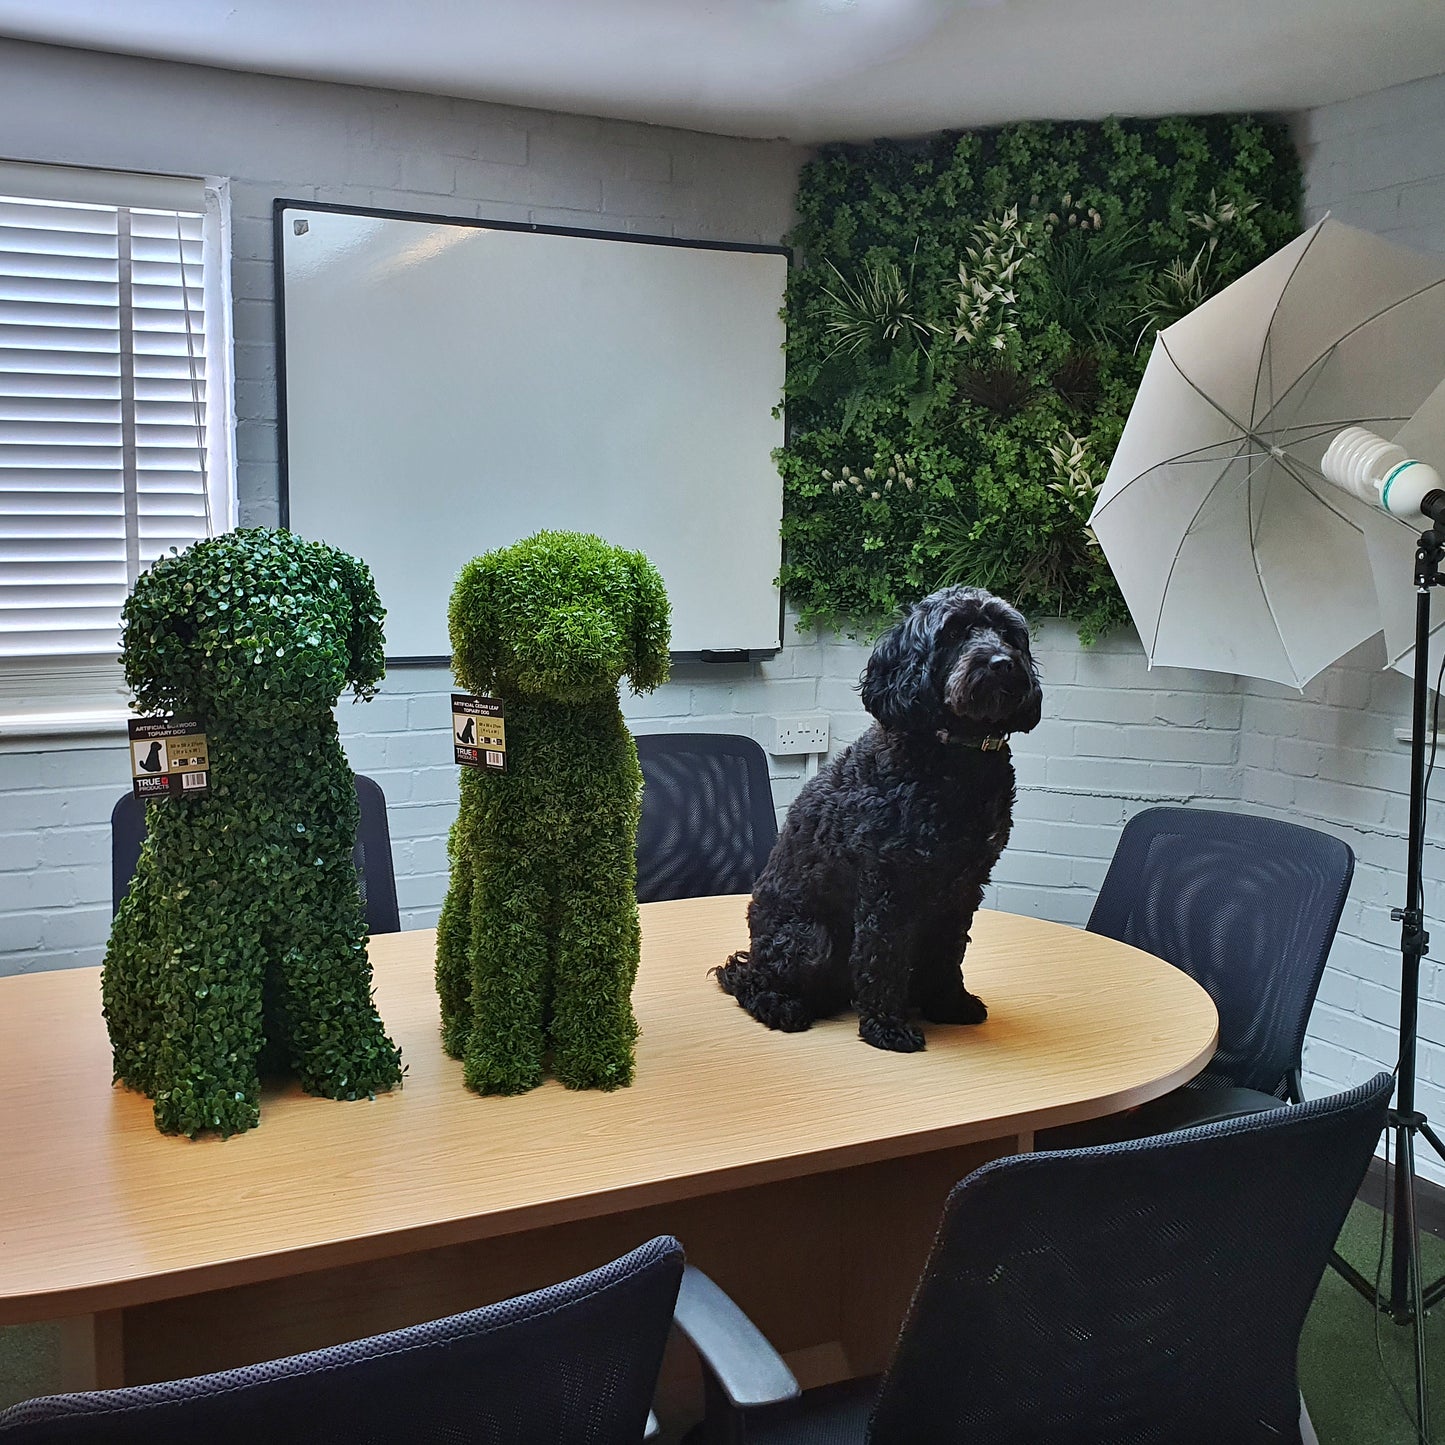 Company dog Bonnie gets in on the photoshoot